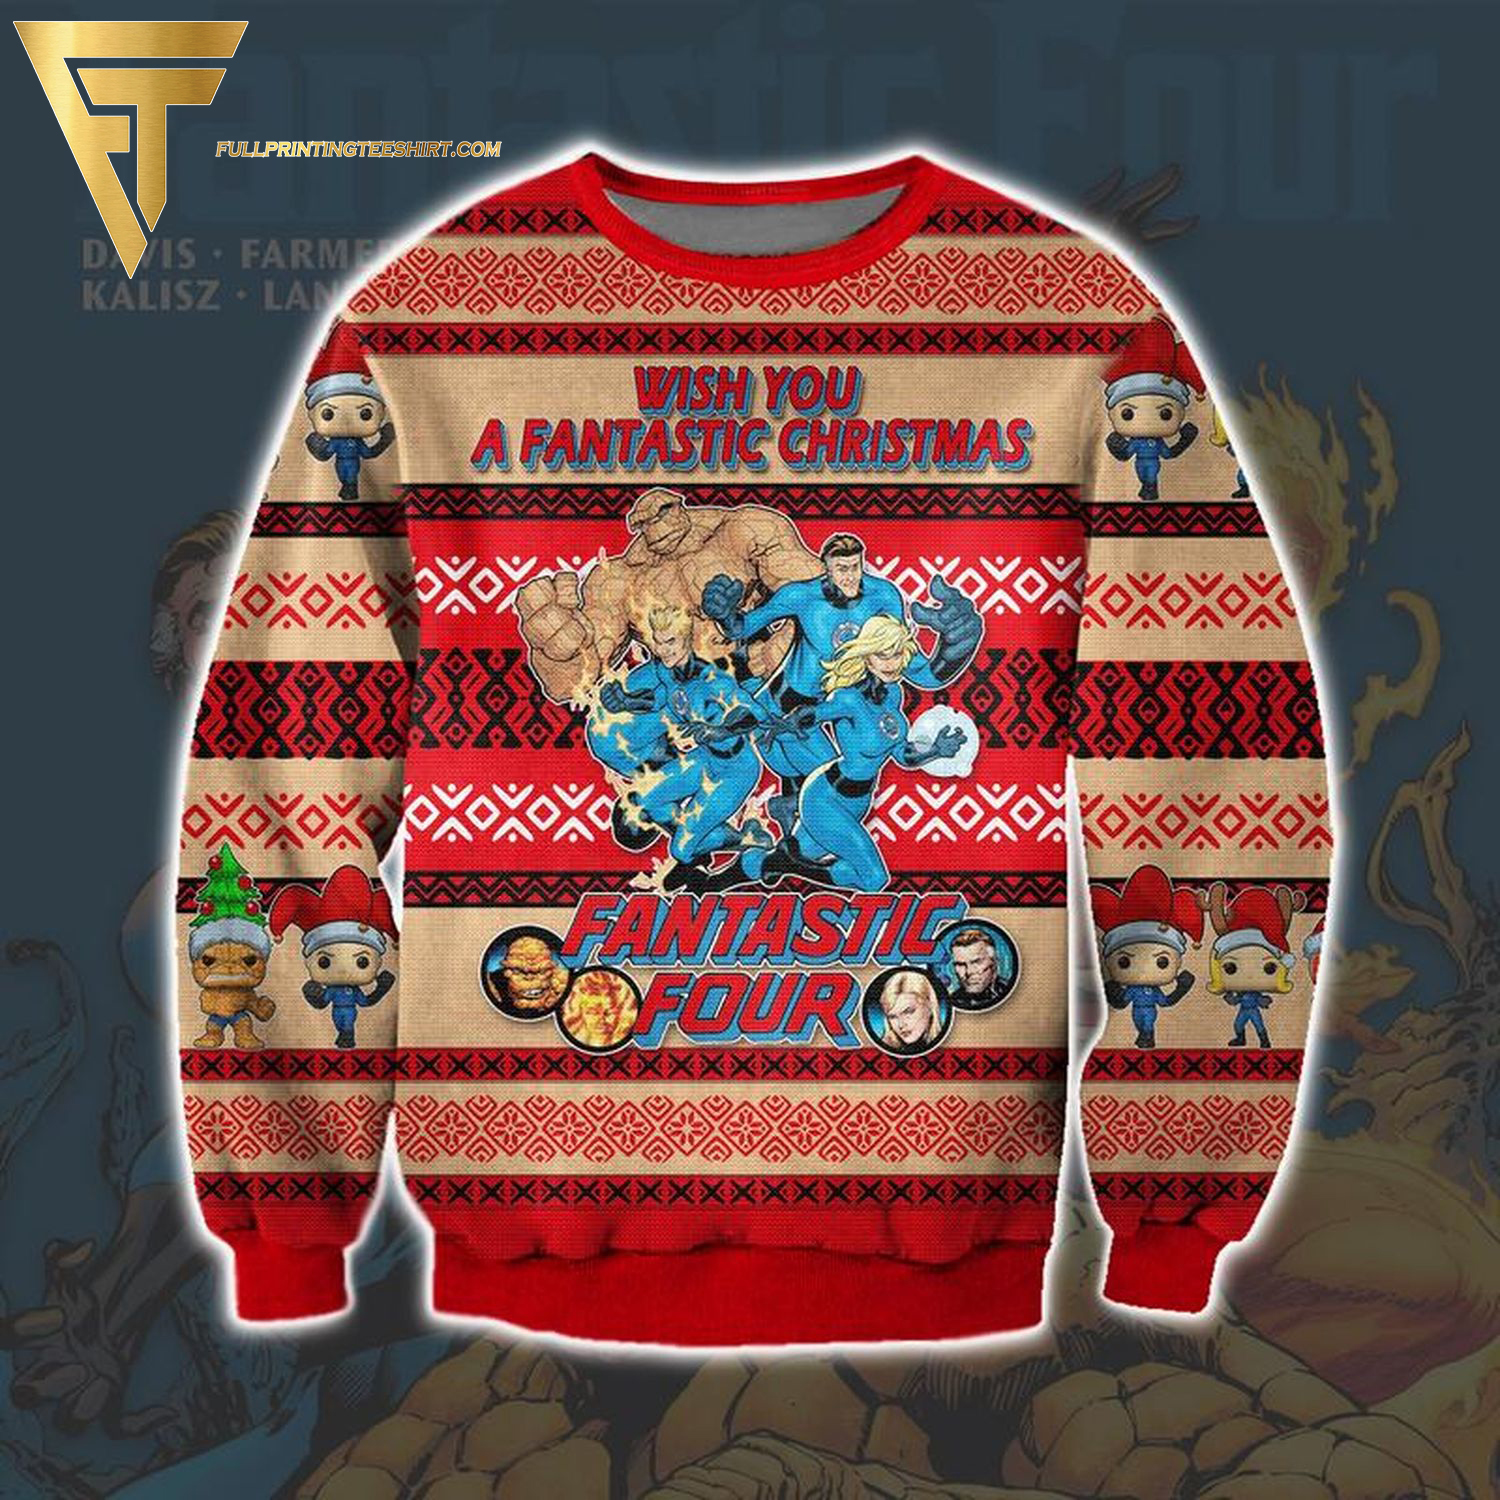 Fantastic Four Wish you a Fantastic Christmas Ugly Christmas Sweater